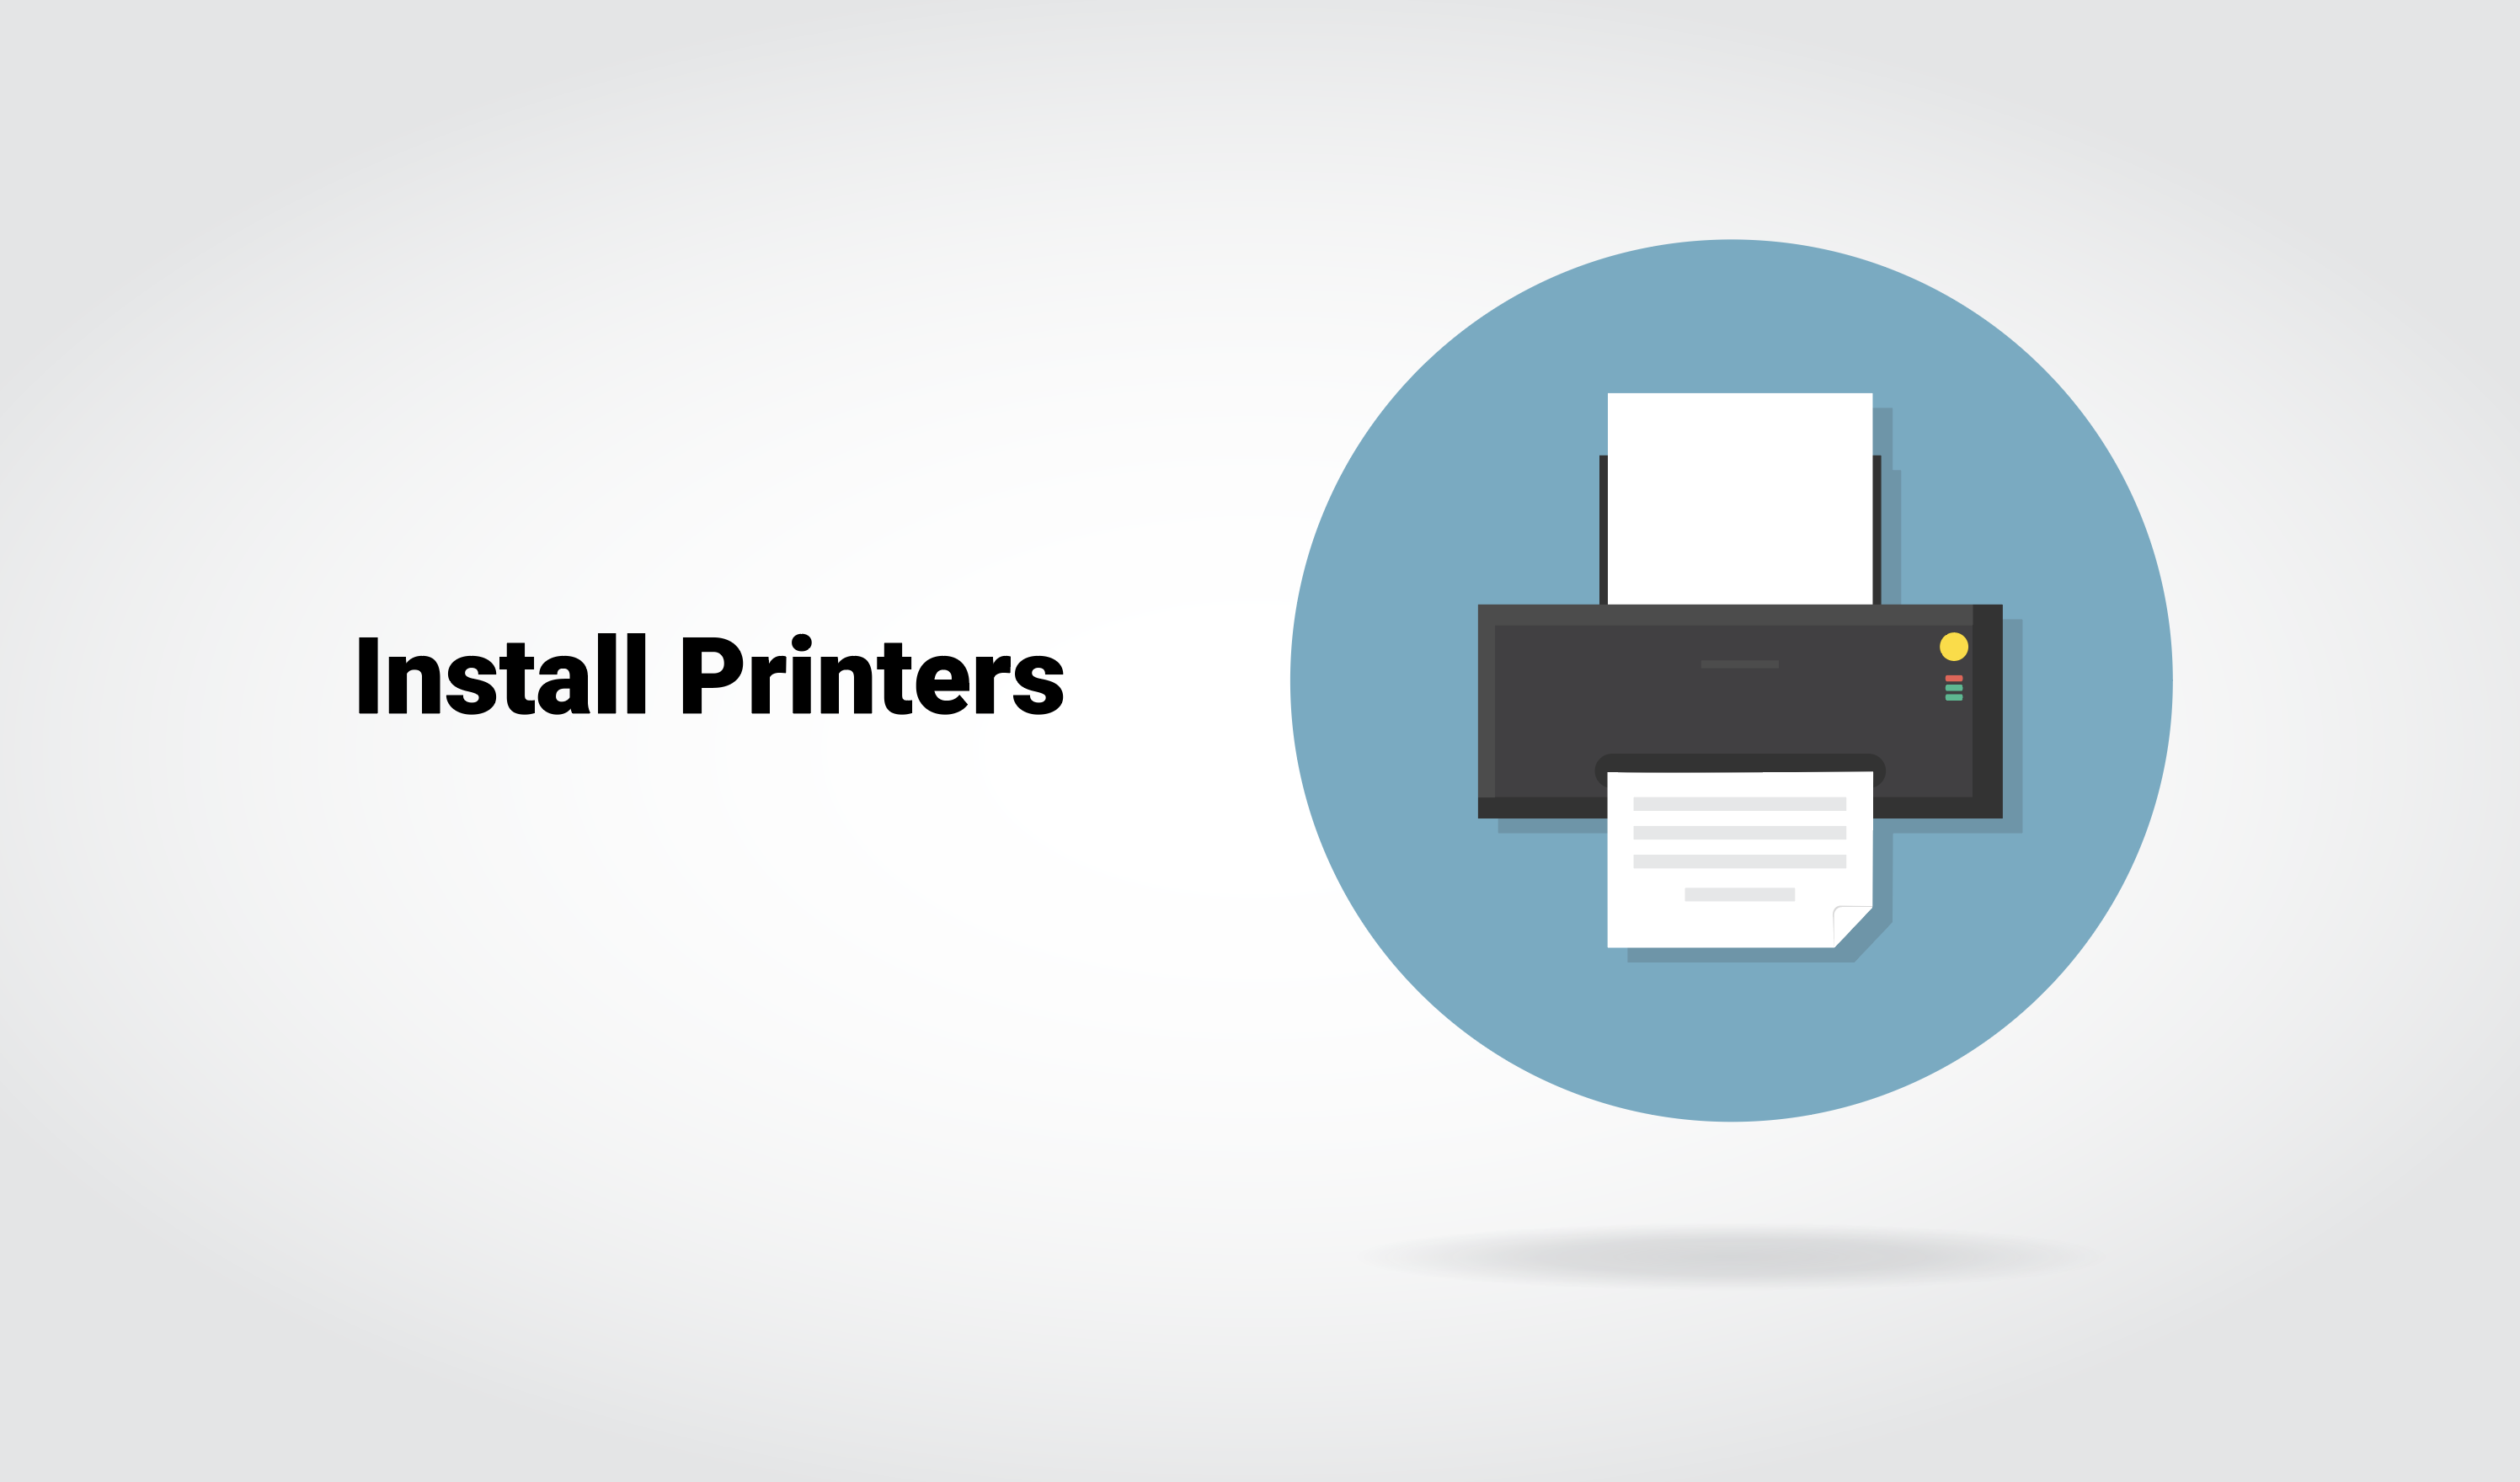 How to use PowerShell install printers | PDQ